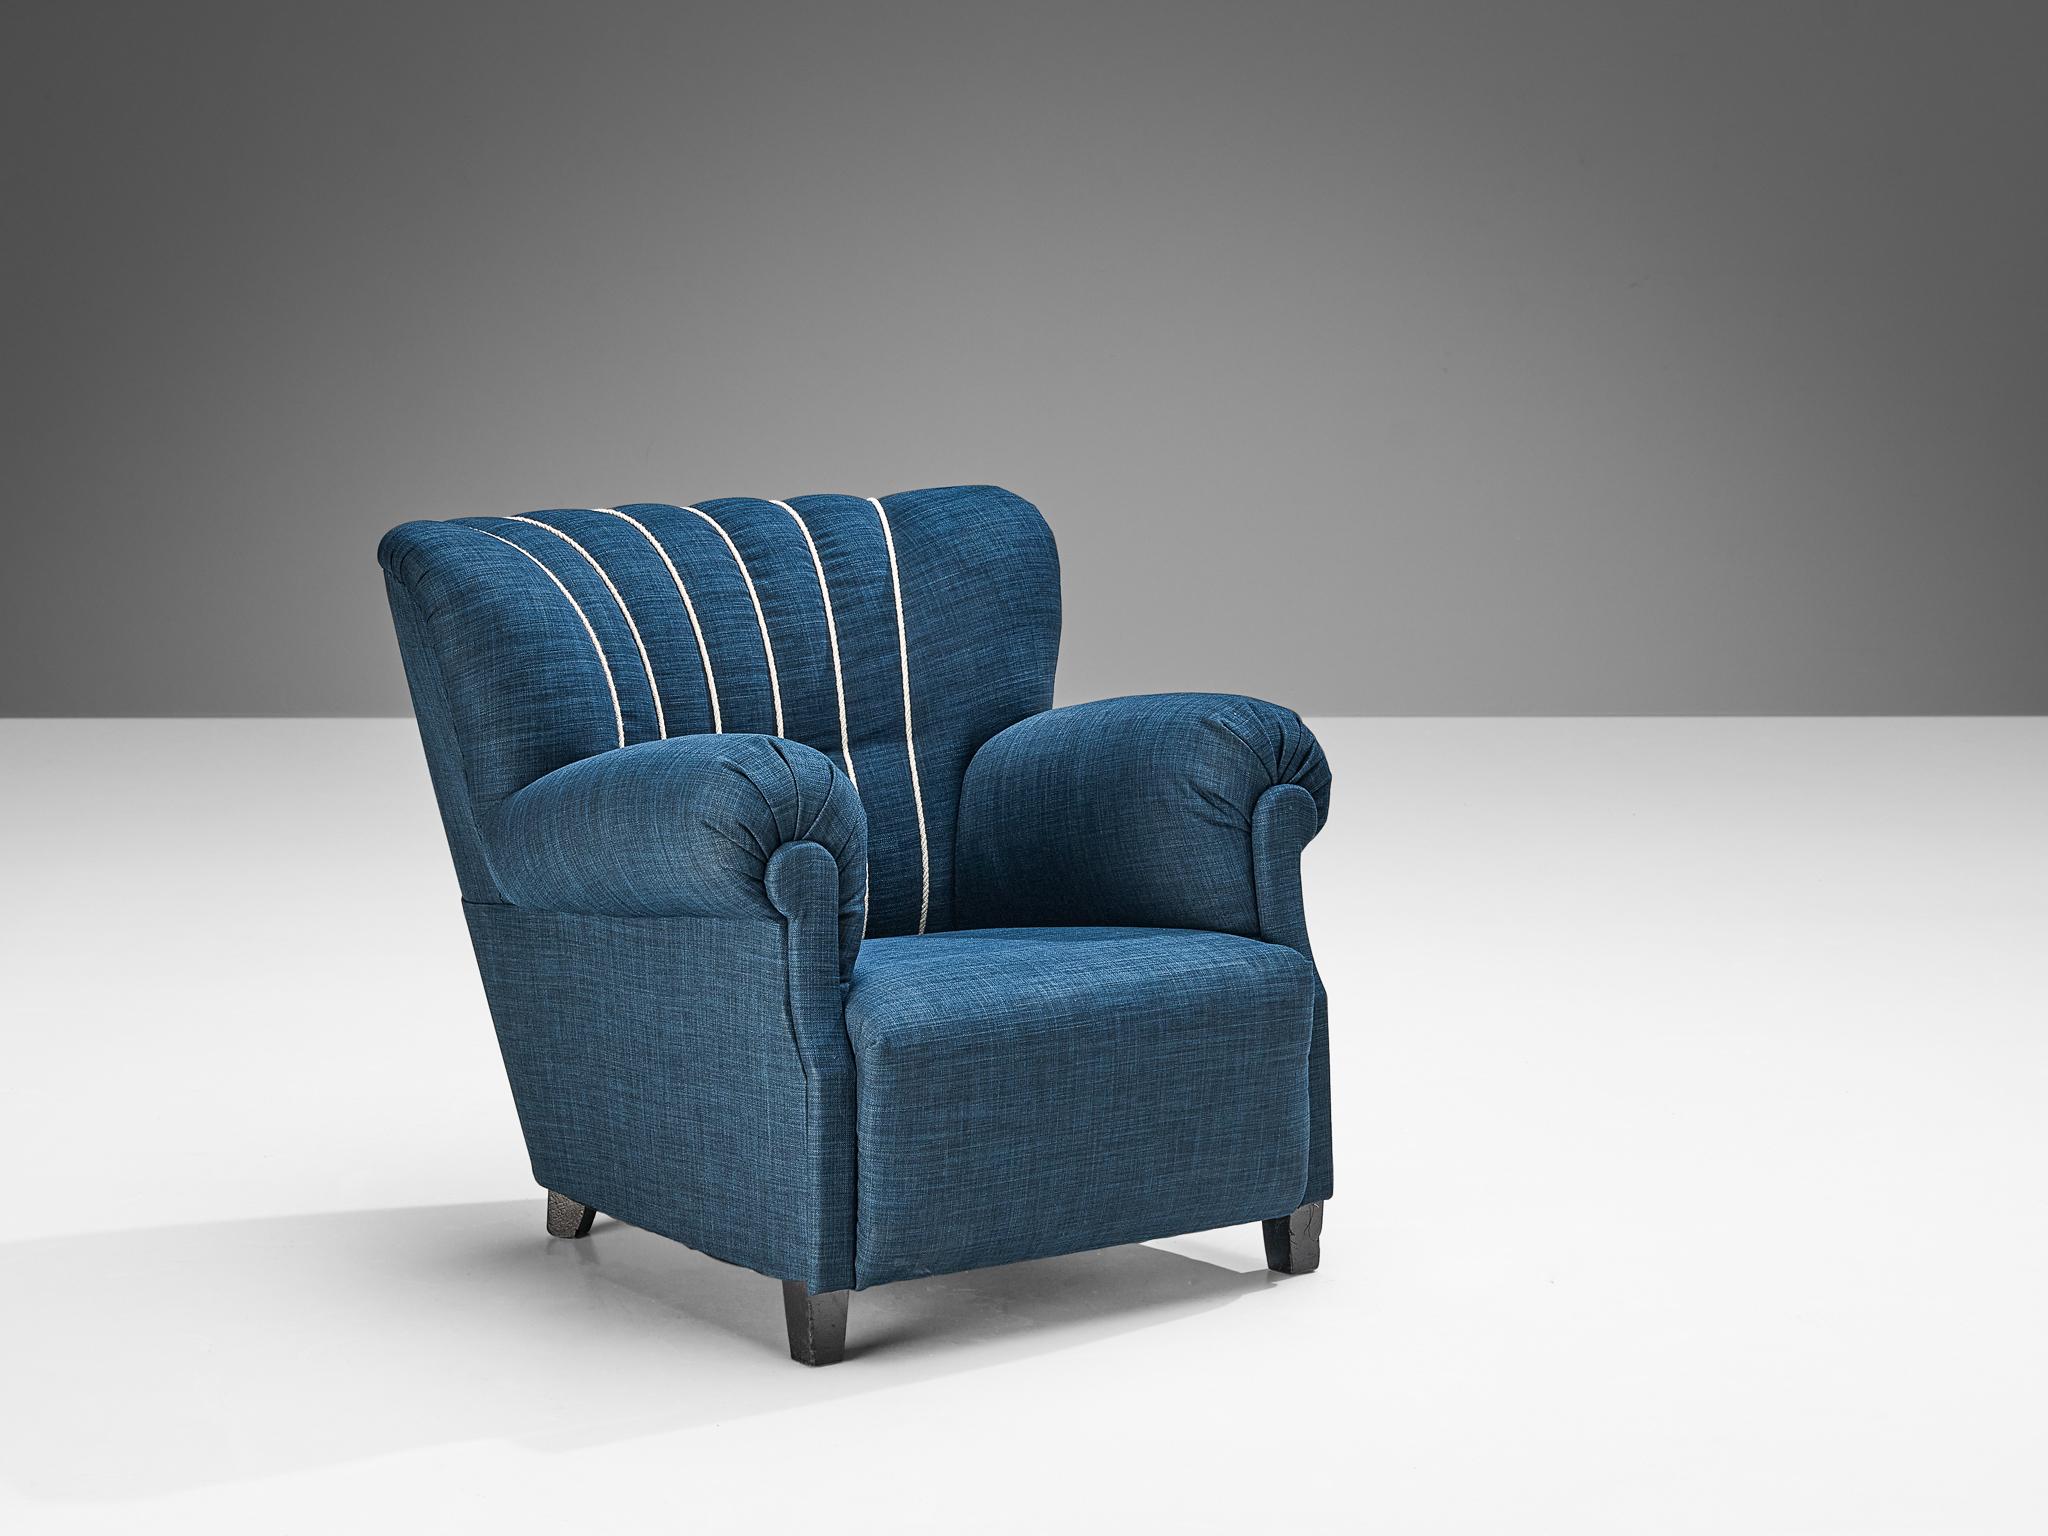 Mid-20th Century Pair of Art Deco Lounge Chairs in Blue Upholstery For Sale